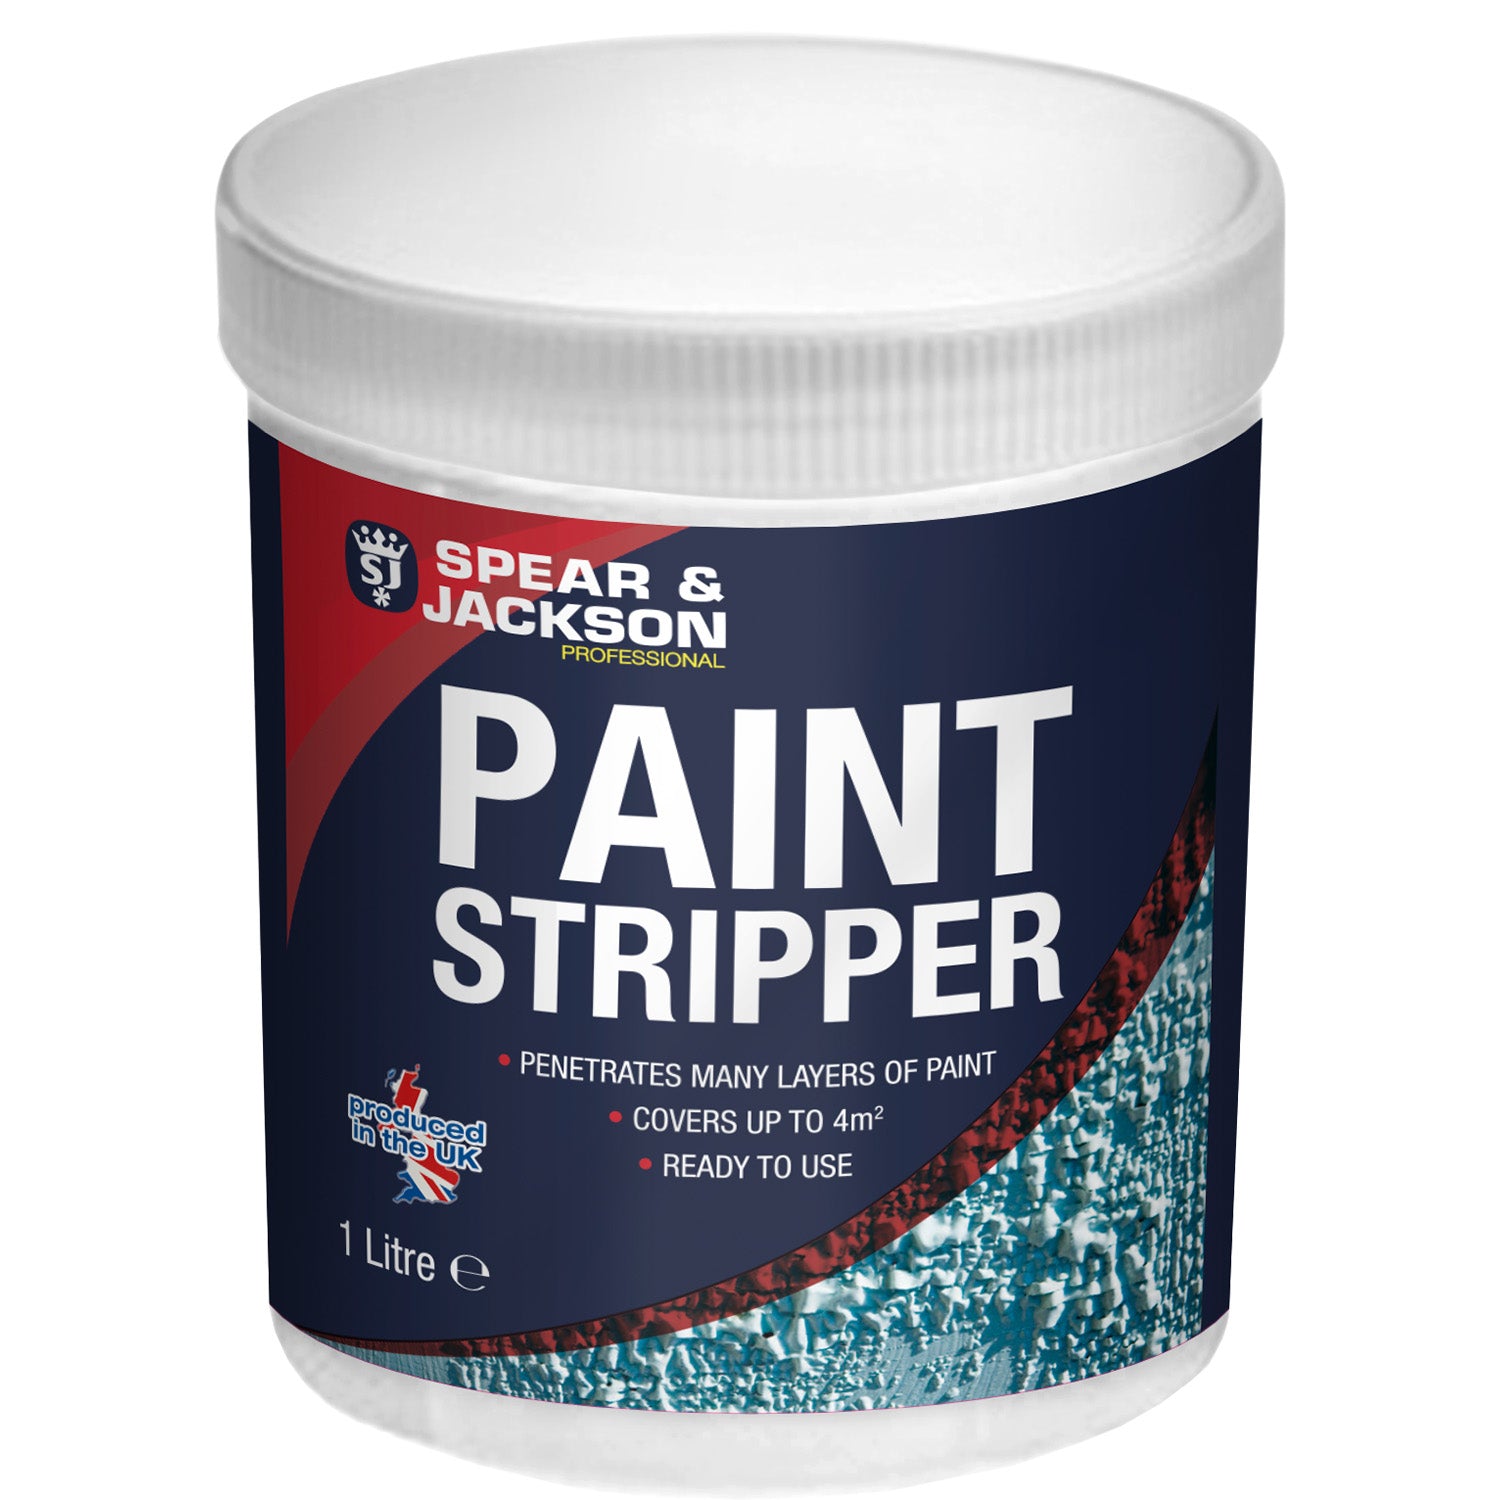 Spear and Jackson Professional Paint Stripper 2 x 1 Litre